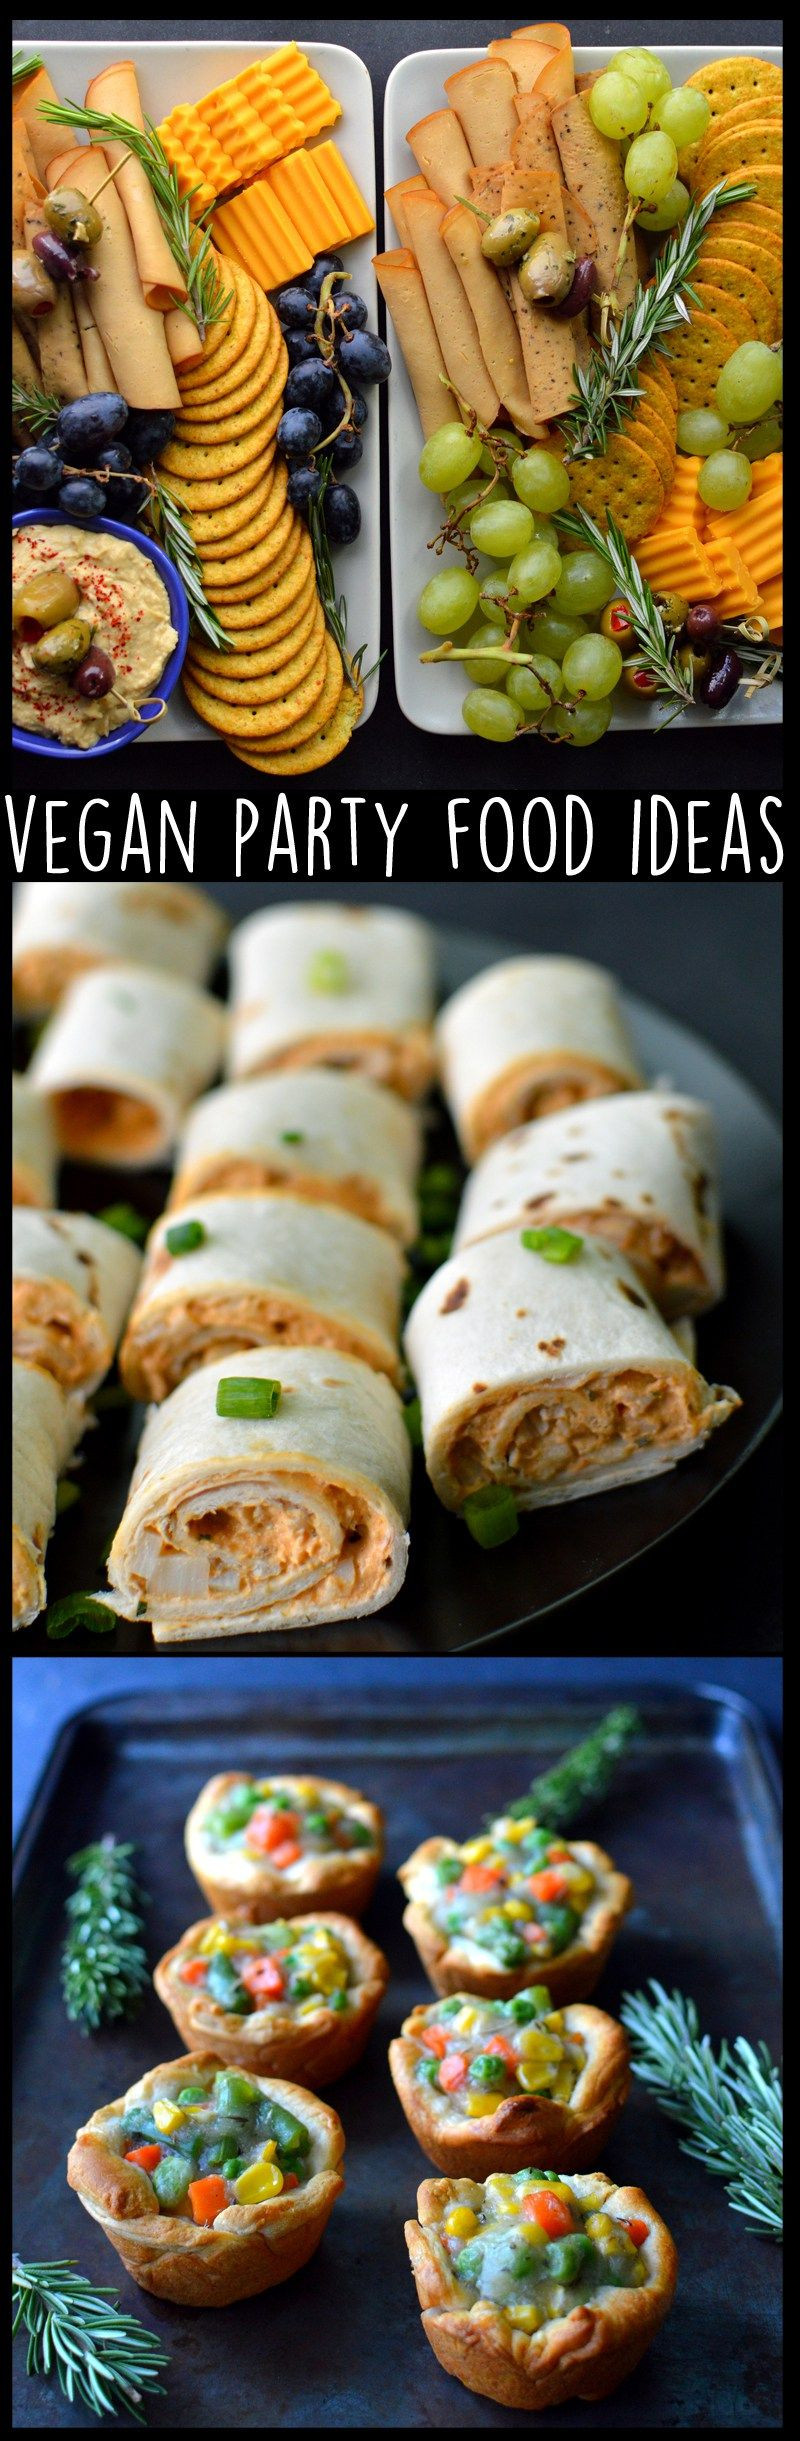 Easy Vegetarian Appetizers Finger Foods
 Vegan Party Food Ideas for Holidays Potlucks Appetizers